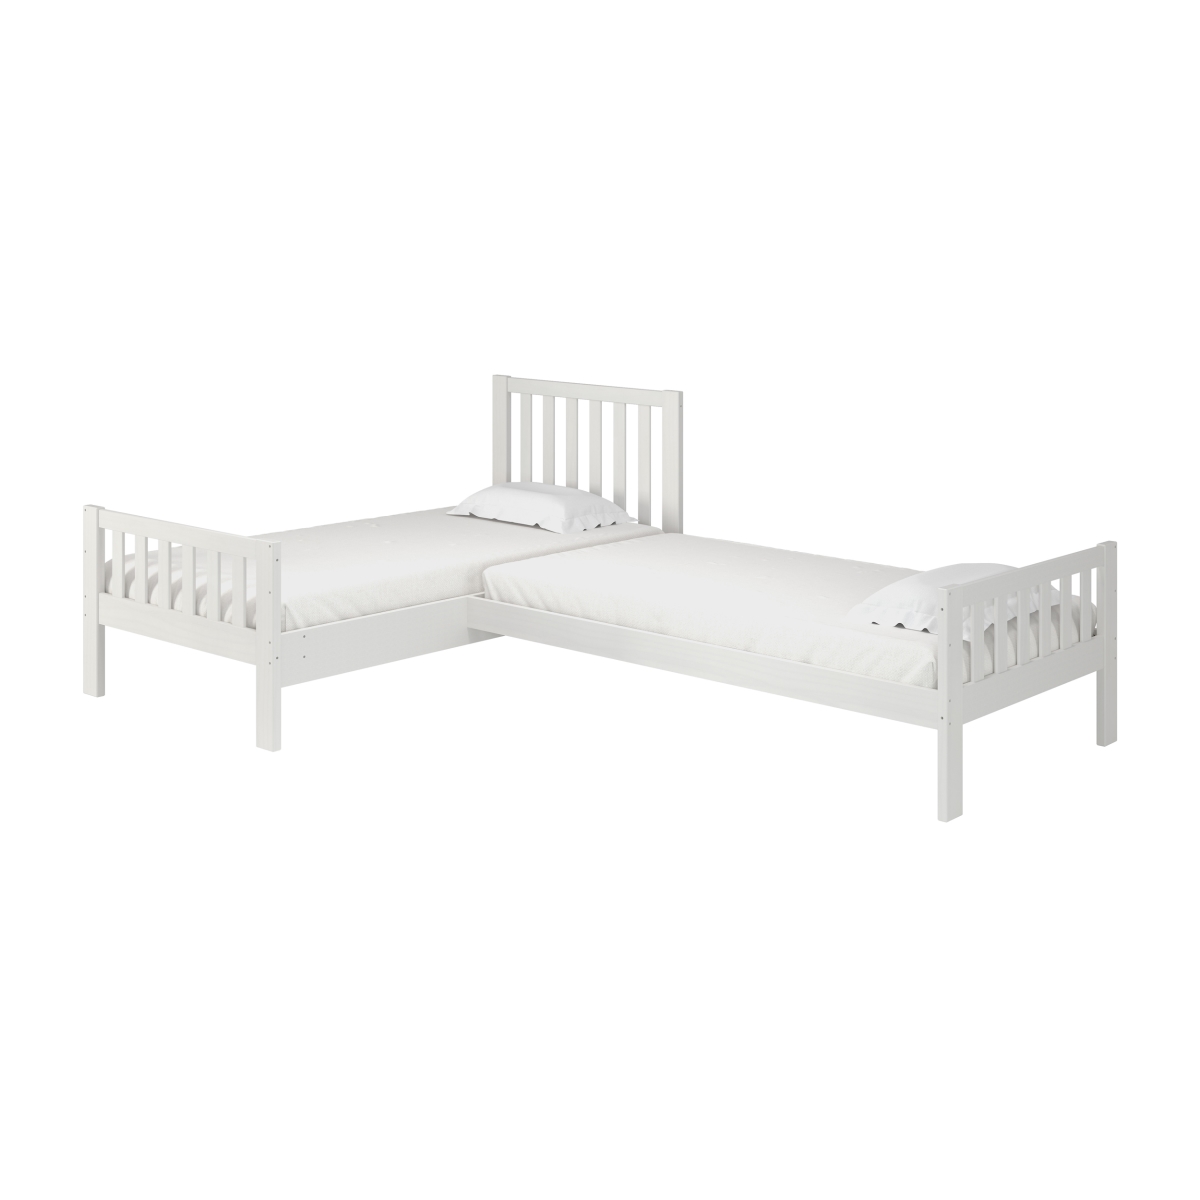 Picture of Alaterre AJAU11WH Aurora Corner L-Shaped Twin Wood Bed Set, White